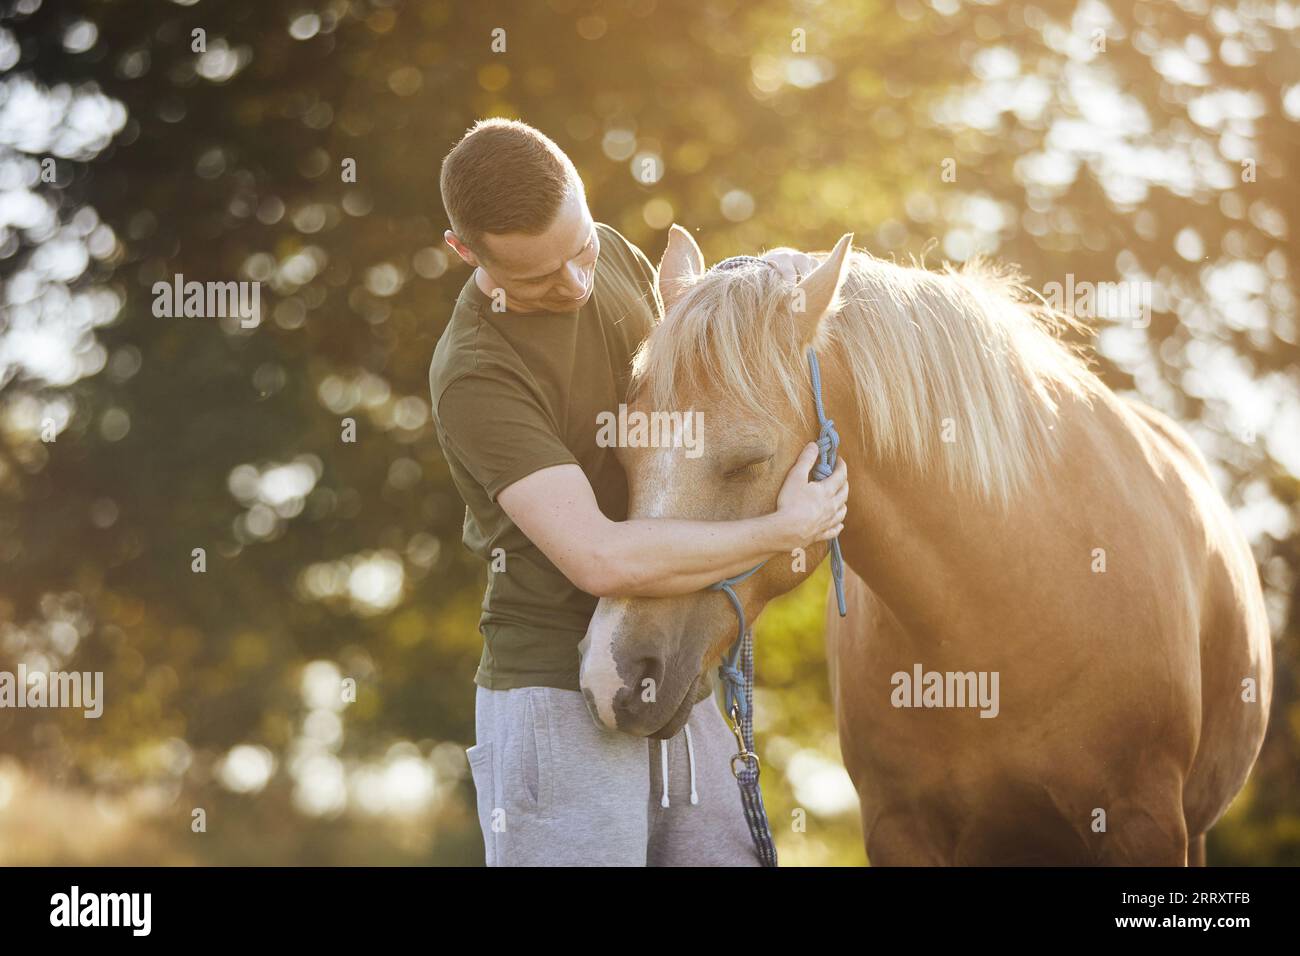 Man is embracing of theraphy horse. Themes hippotherapy, care and friendship betweem people and animals. Stock Photo